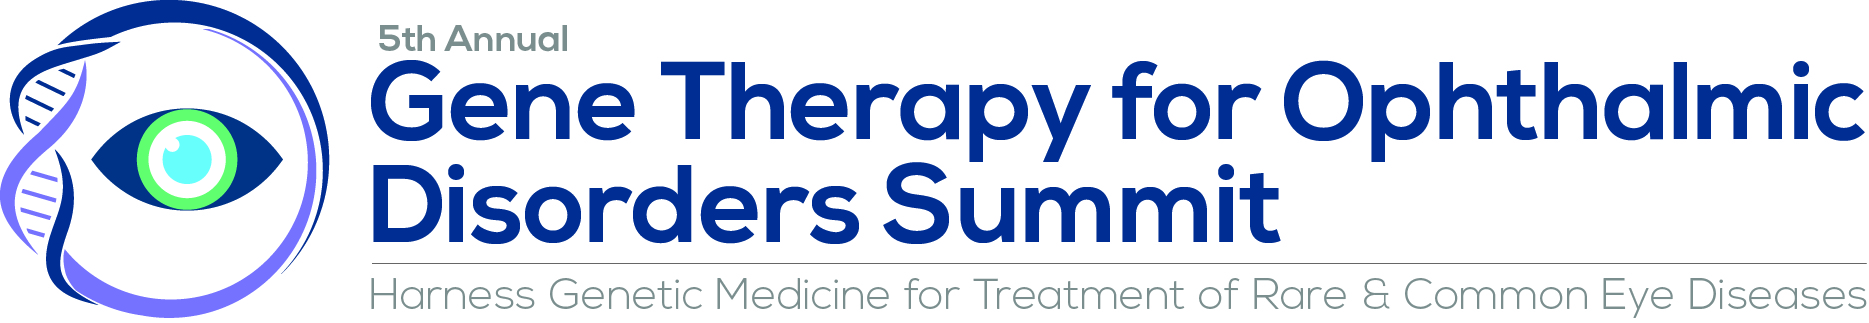 Gene Therapy for Ophthalmic Disorders Summit TAG